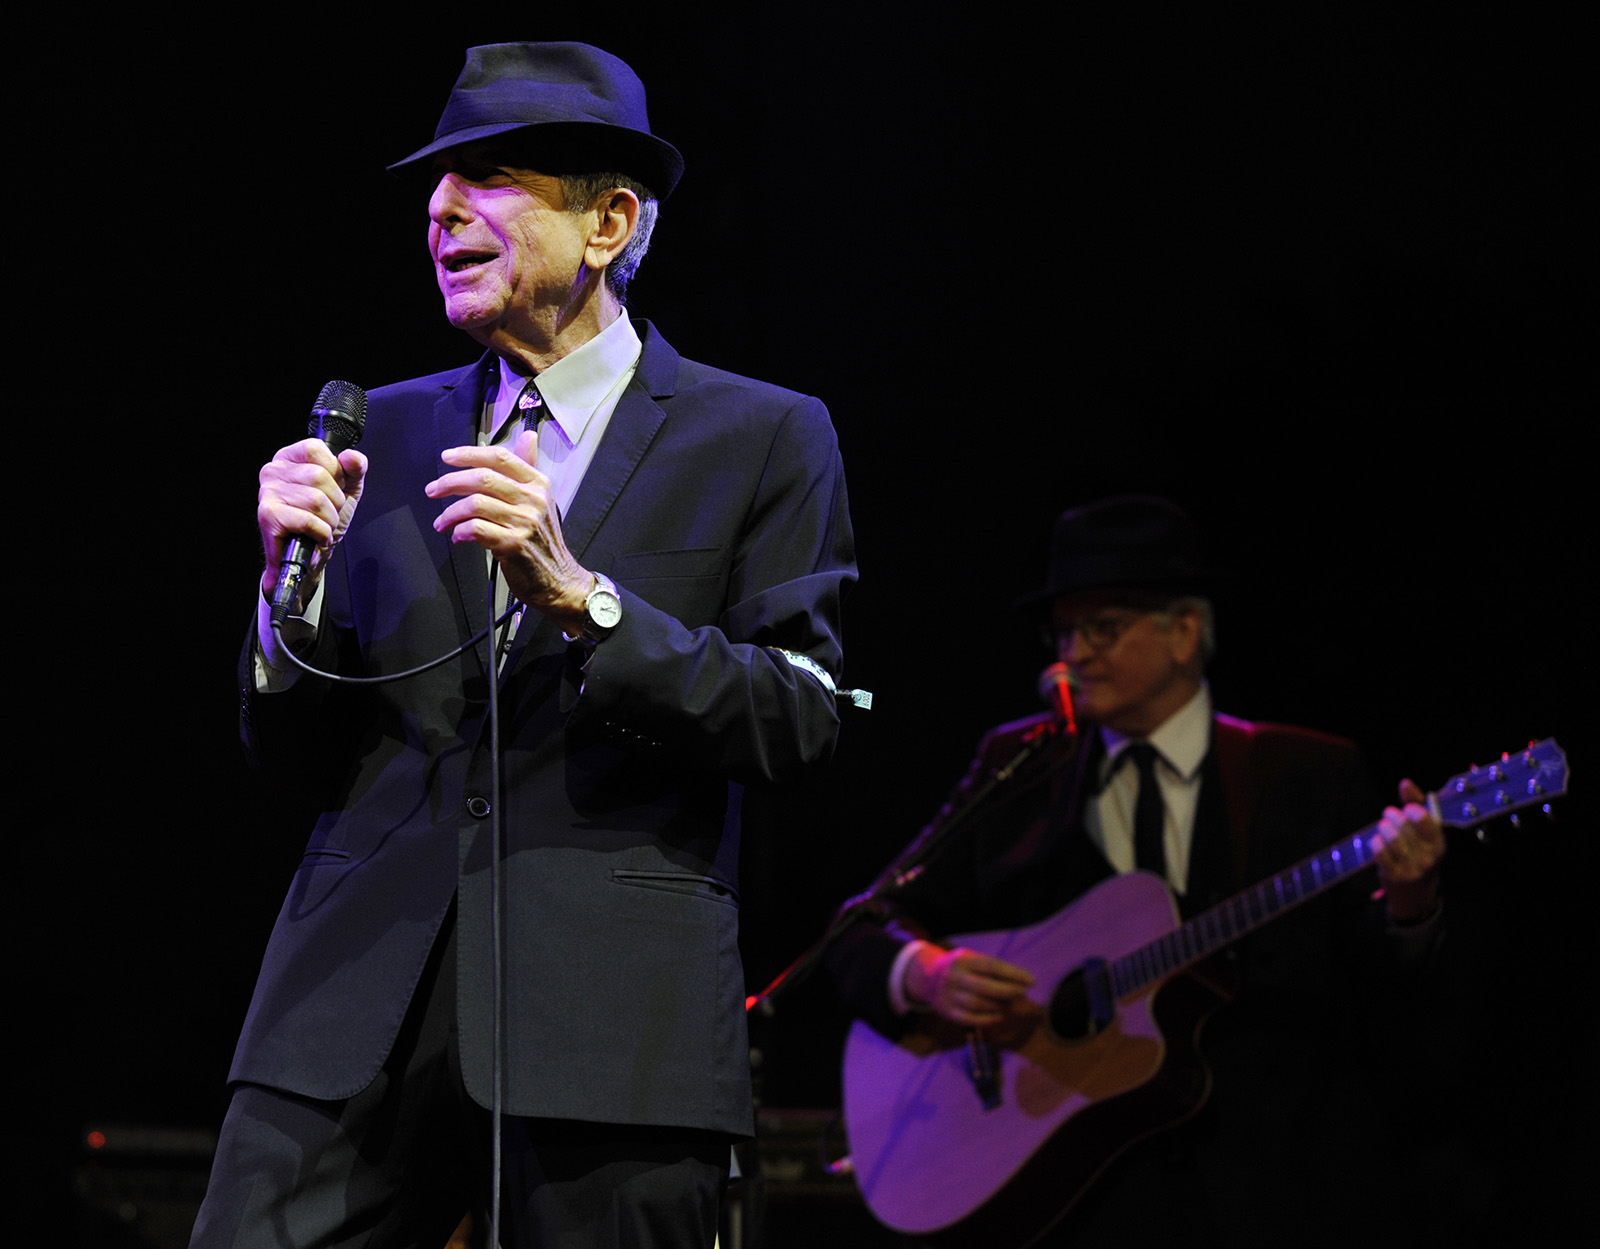 FILE - In this April 17, 2009, file photo, Leonard Cohen performs during the Coachella Valley Music & Arts Festival in Indio, Calif. (AP Photo/Chris Pizzello, File)